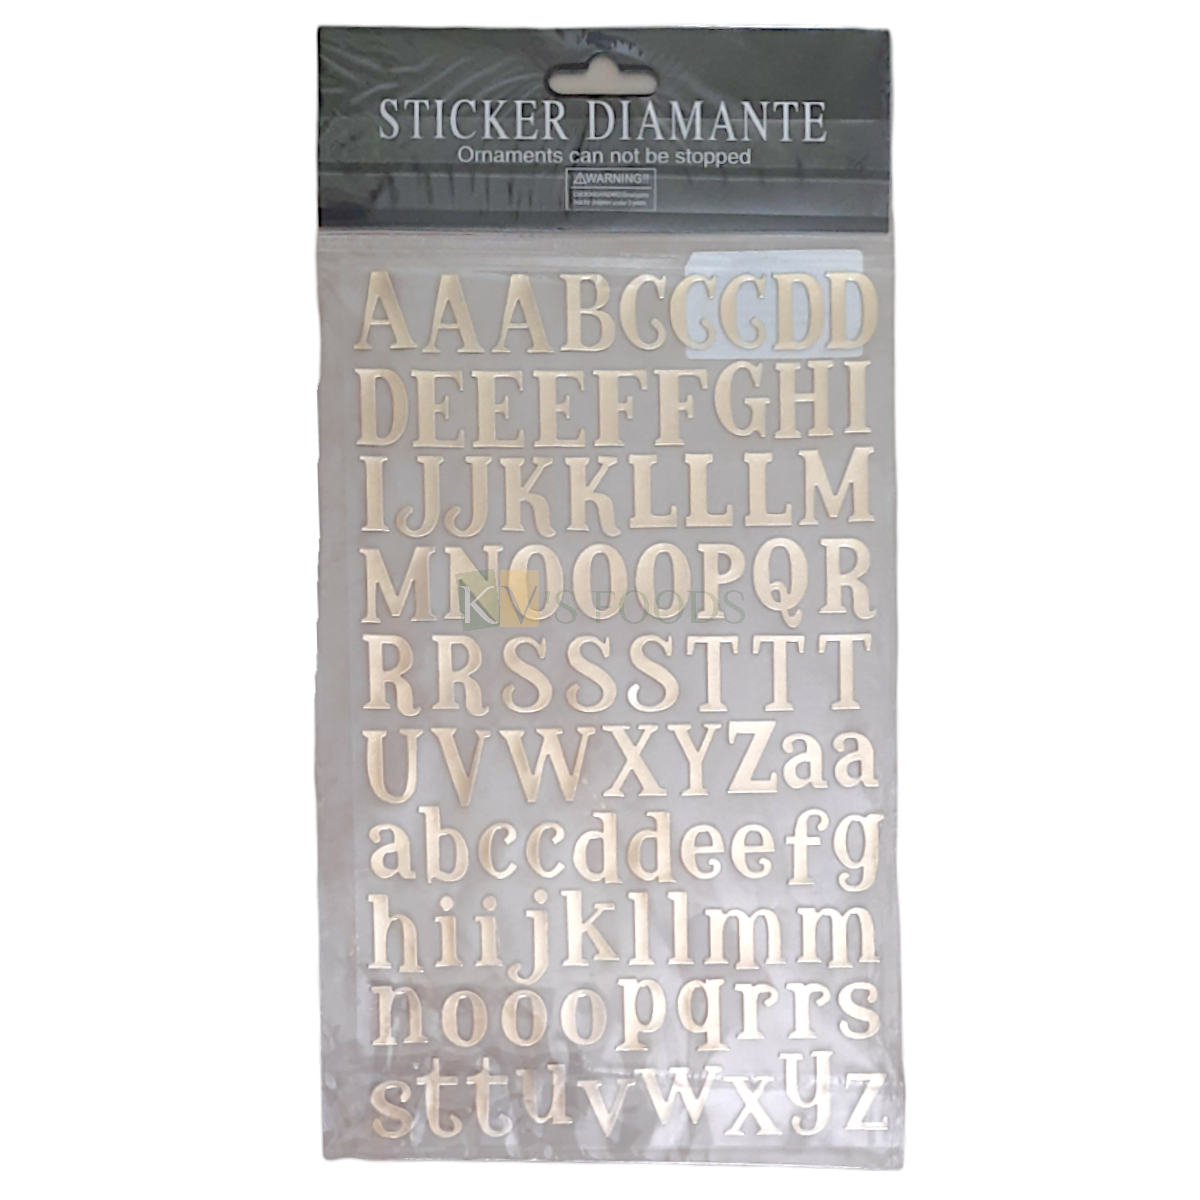 1PC Golden Shiny Self Adhesive Alphabets Letter Stickers Cake Base Stickers Lower Upper Case Sticker DIY Metallic Alphabet Aa-Zz Sheet Big Small Case Sensitive Letters for Birthday Cake Decorations